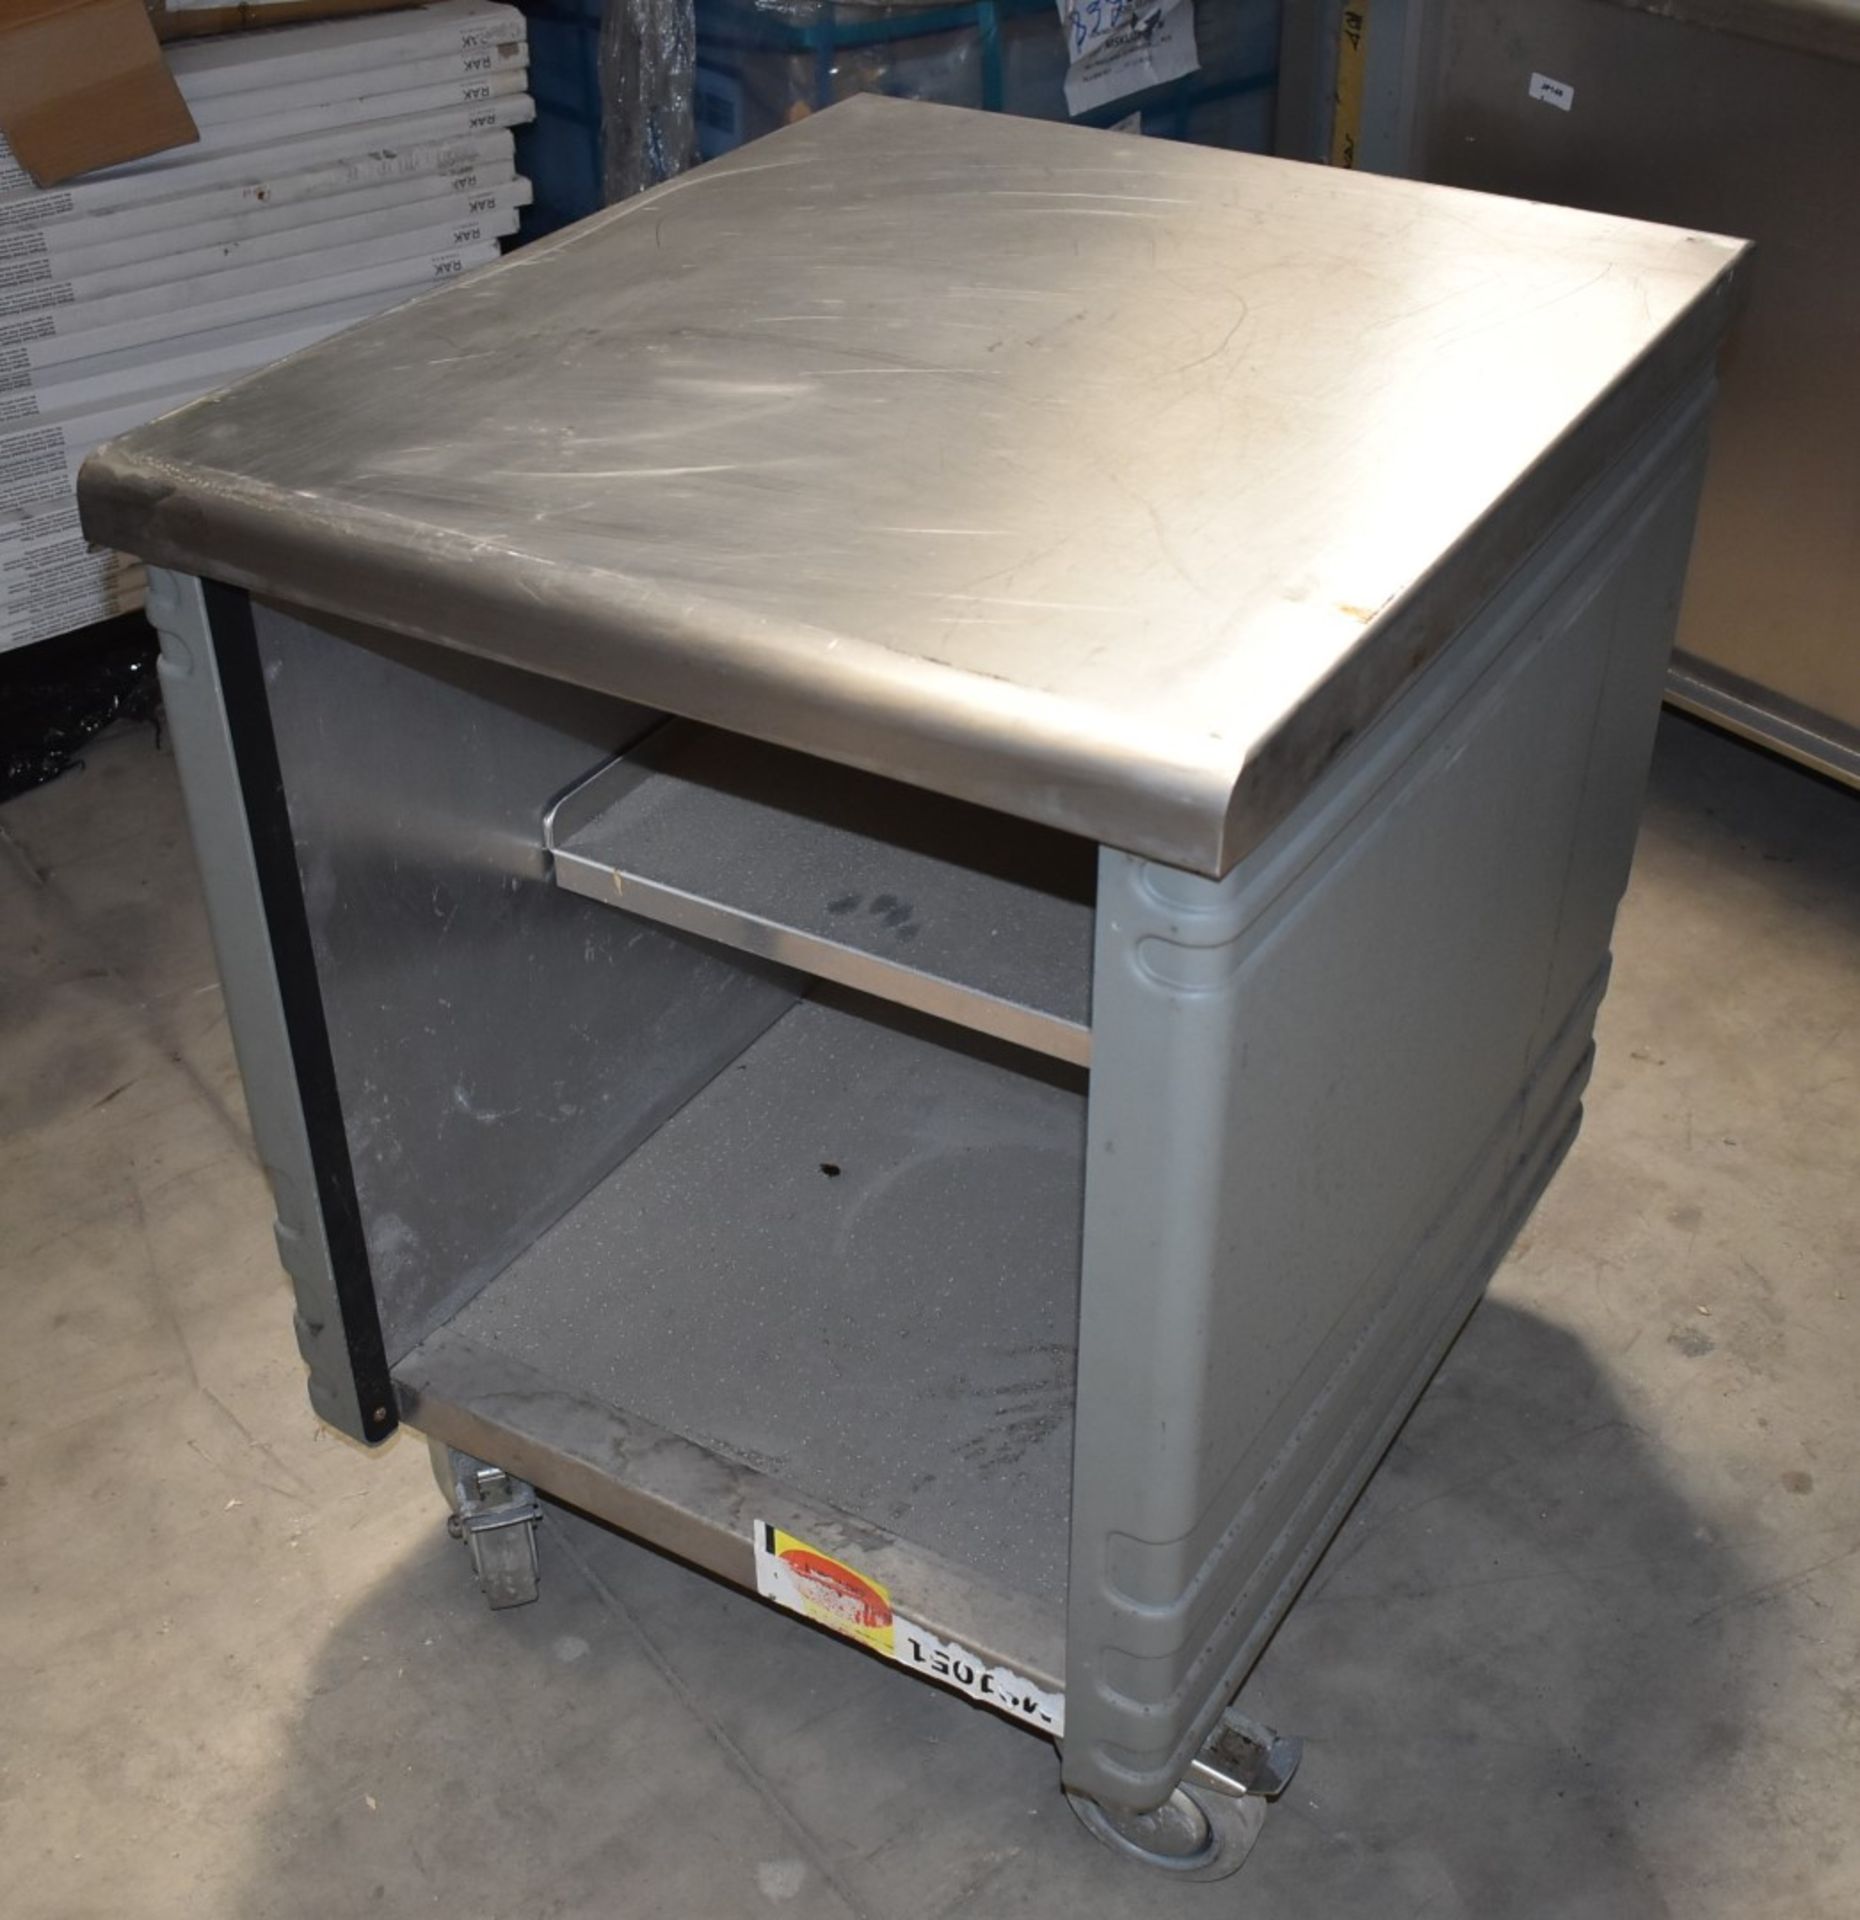 1 x Grundy Commercial Mobile Unit With Stainless Top, Plastic Side Protector Panels, Space to